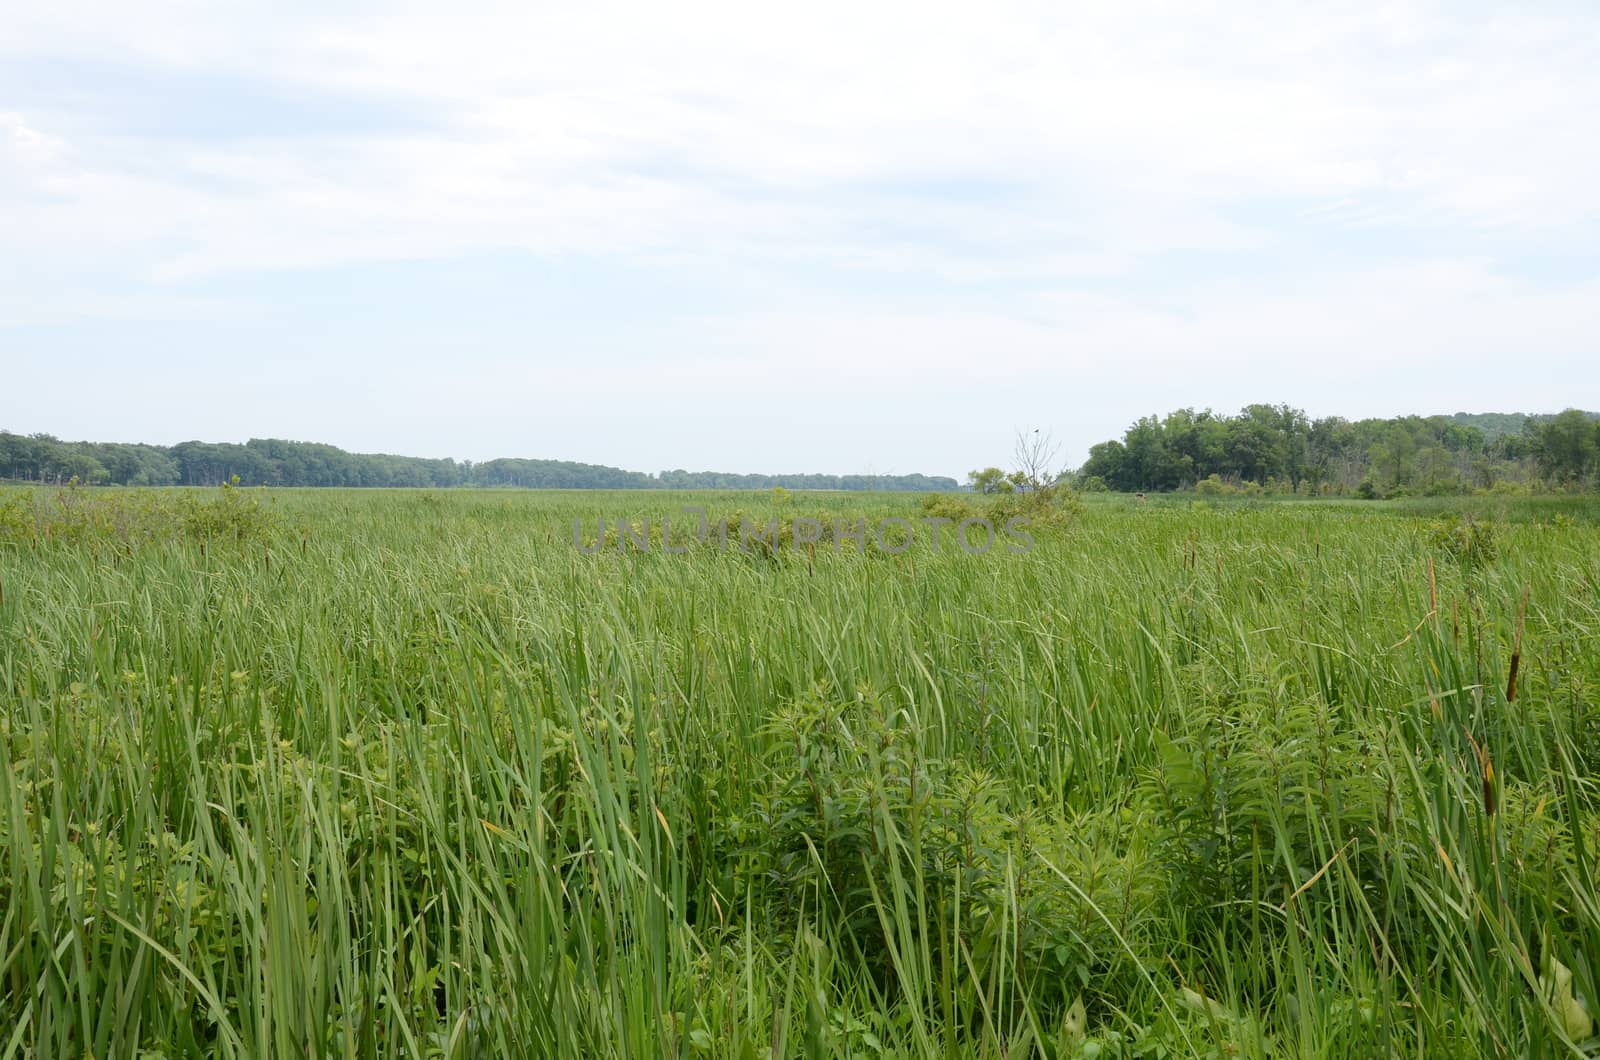 green grasses and plants in wetland or marsh environment with trees